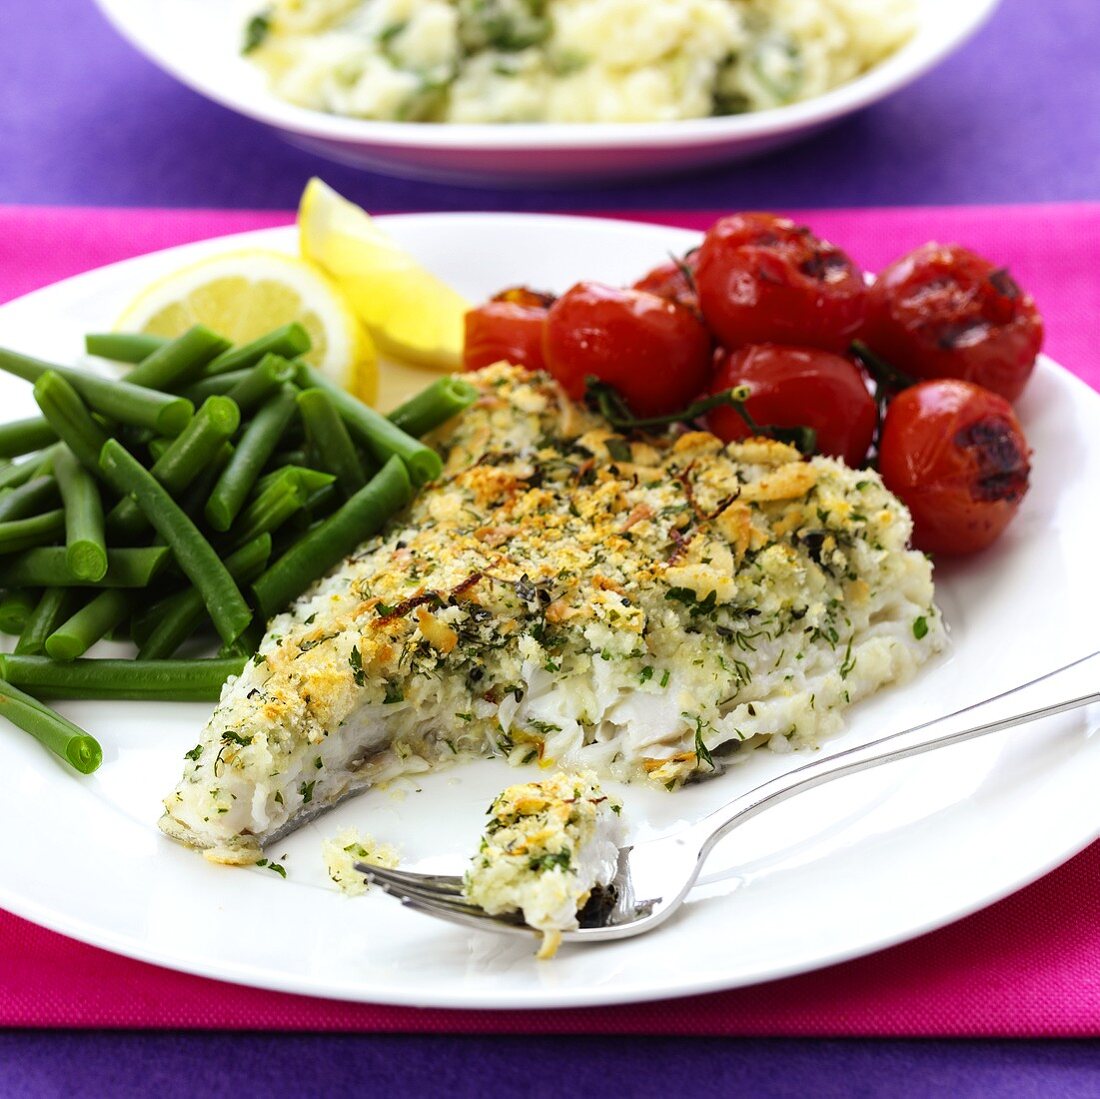 Cod with cheese and herb crust, tomatoes and green beans